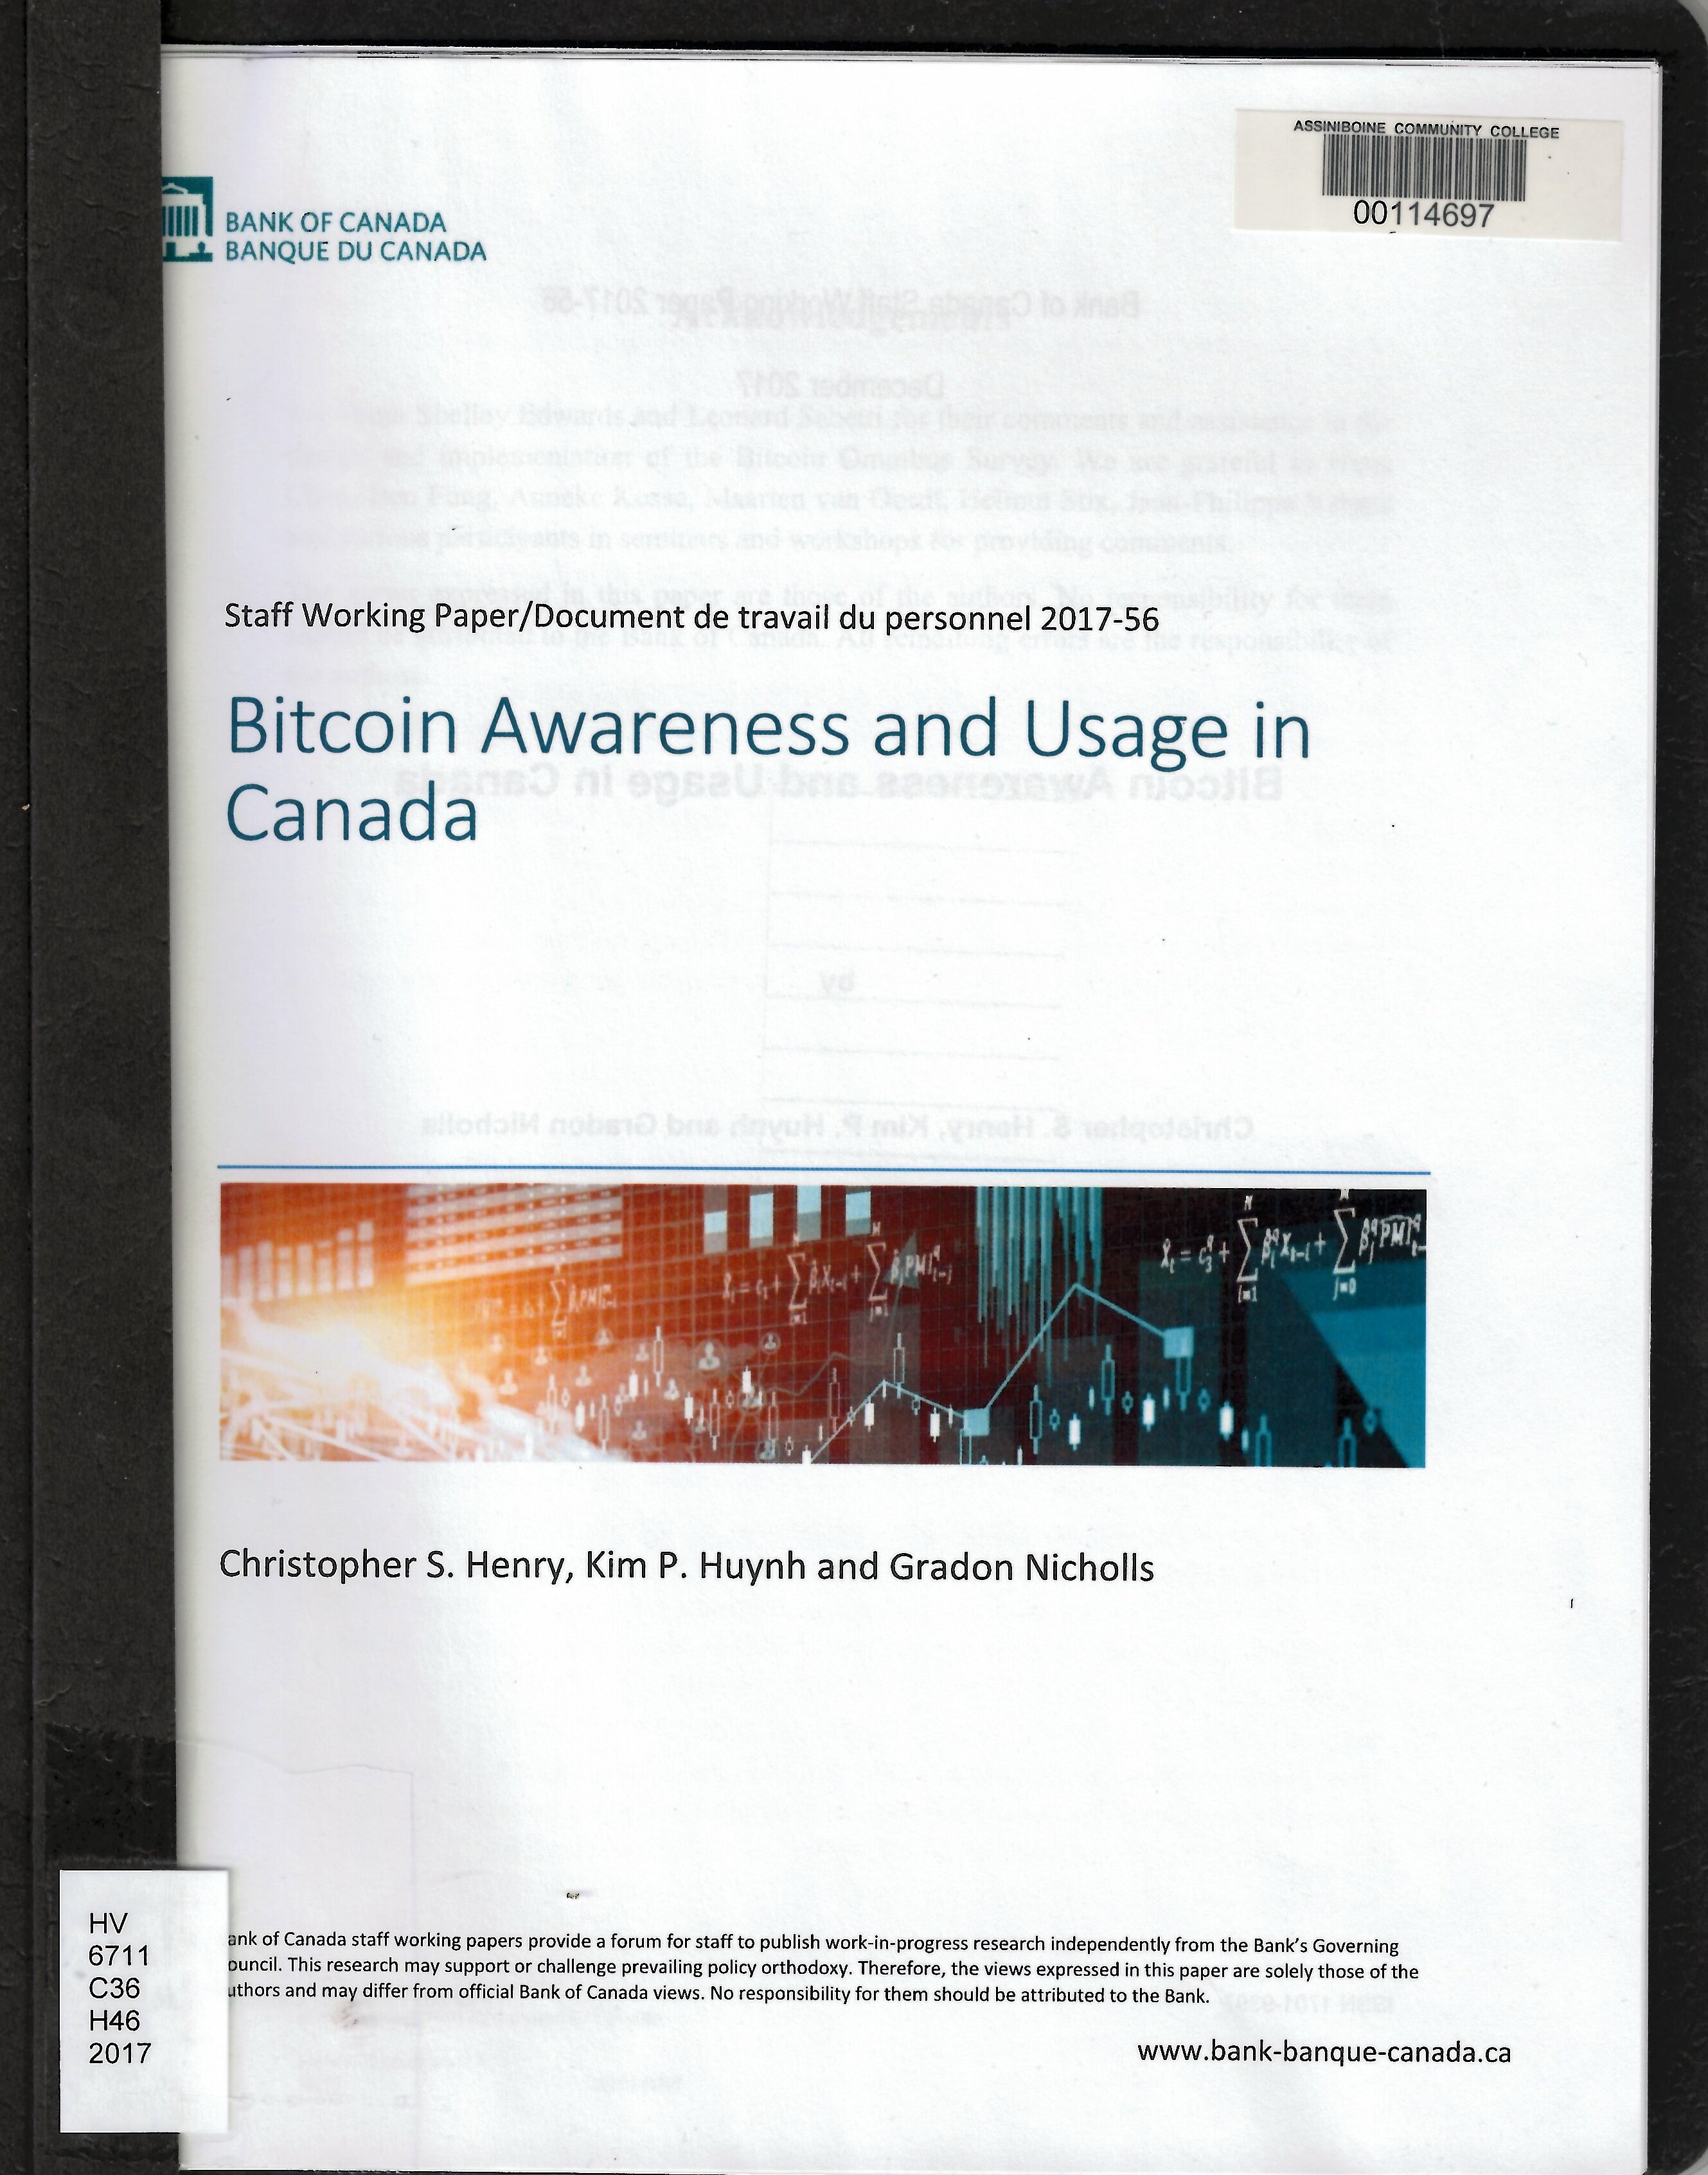 Bitcoin awareness and usage in Canada